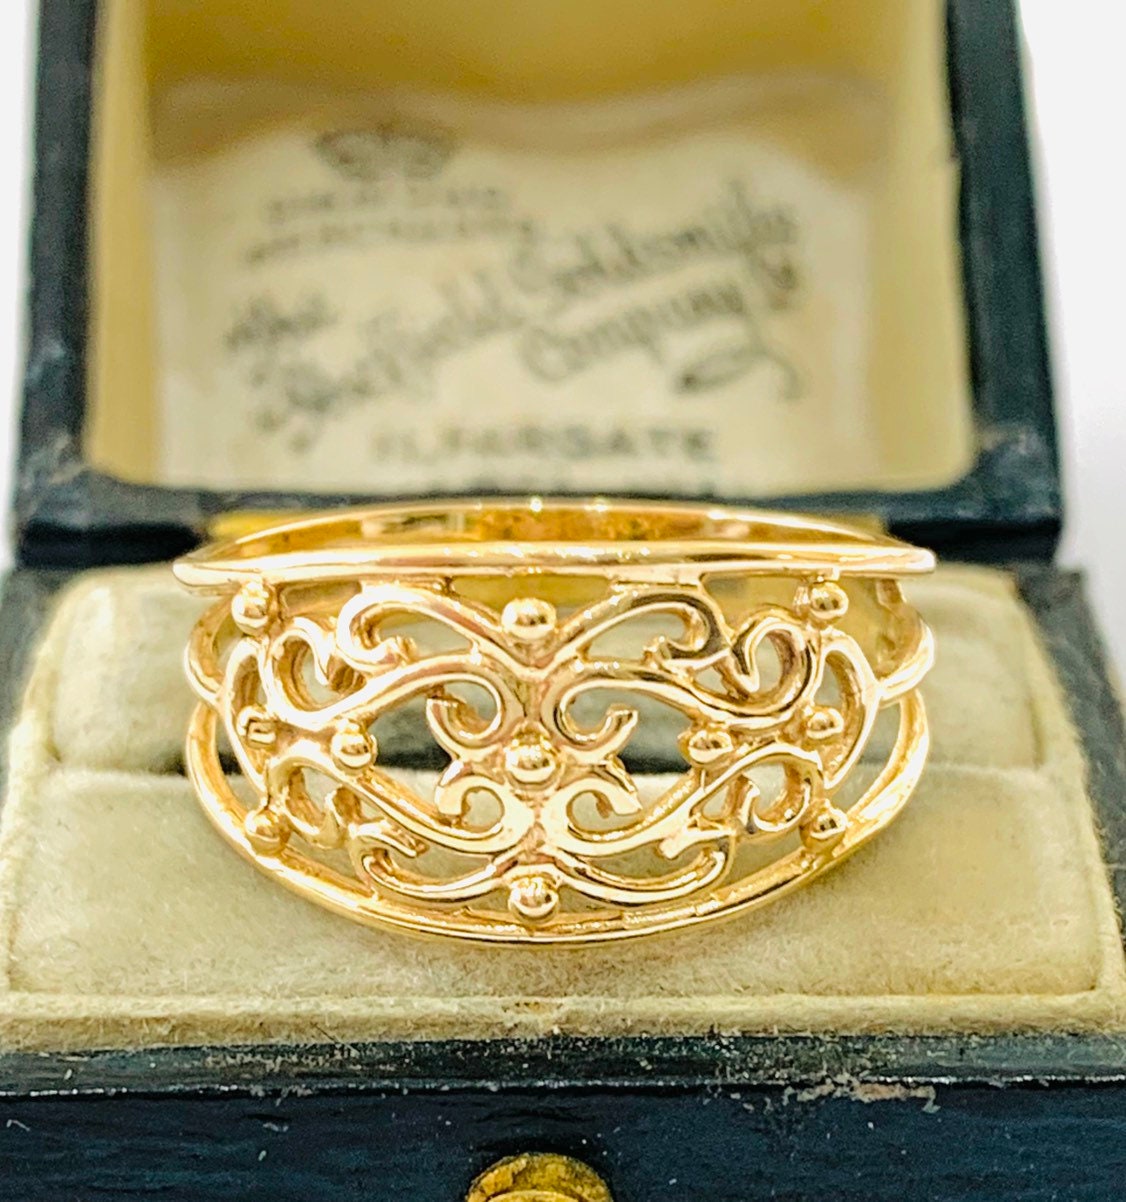 Stunning vintage 9ct yellow gold open patterned ring - fully hallmarked ...